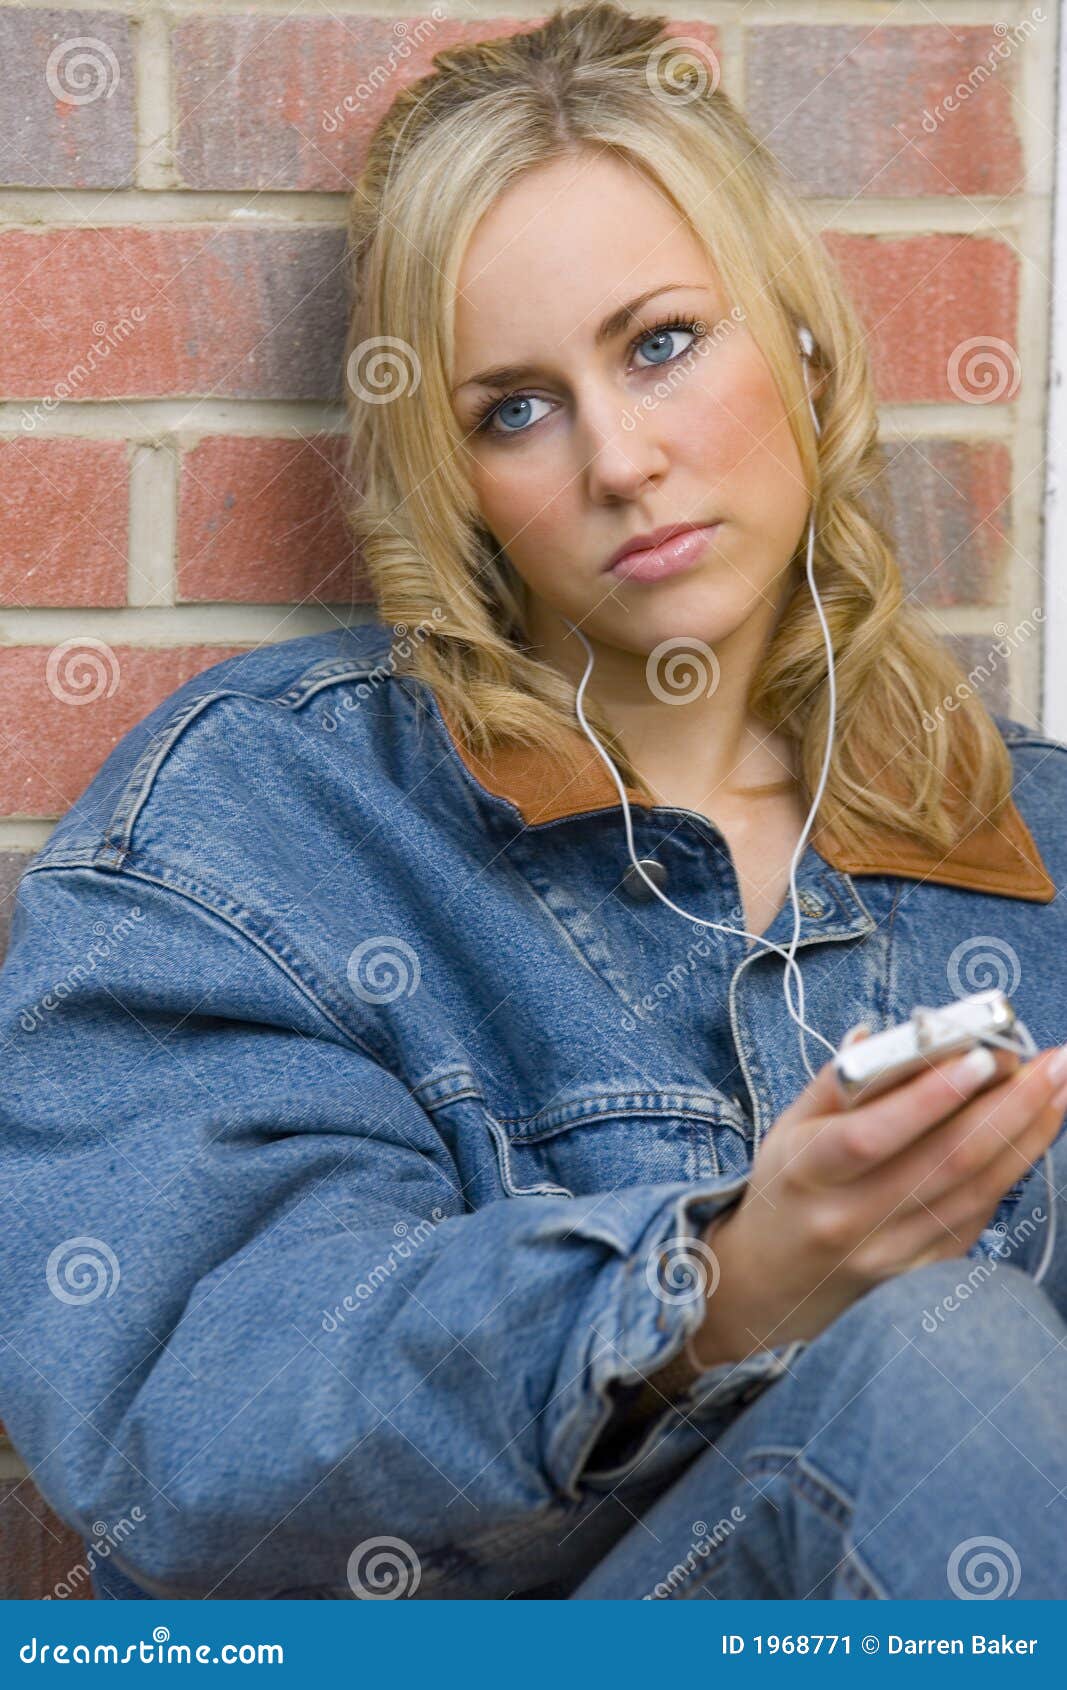 Sad Songs. A beautiful young woman leaning against a wall and listening to an mp3 player with a sad look on her face